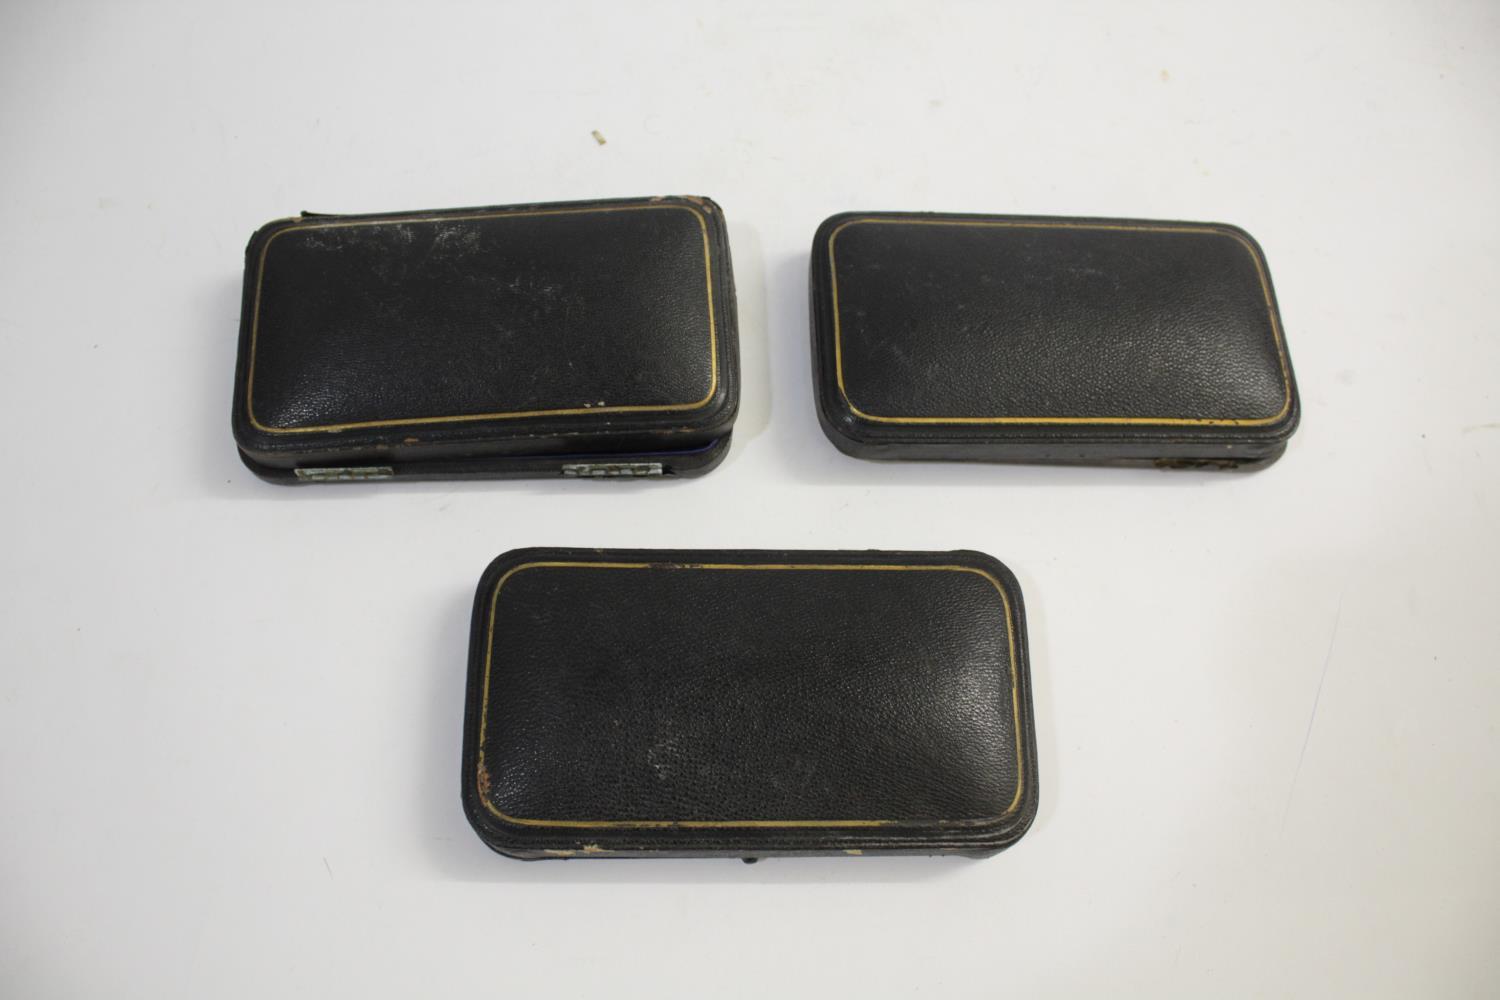 EDE & SONS BOXED 19THC BUCKLES three sets of shoe buckles within silk and velvet lined boxes, each - Image 2 of 2